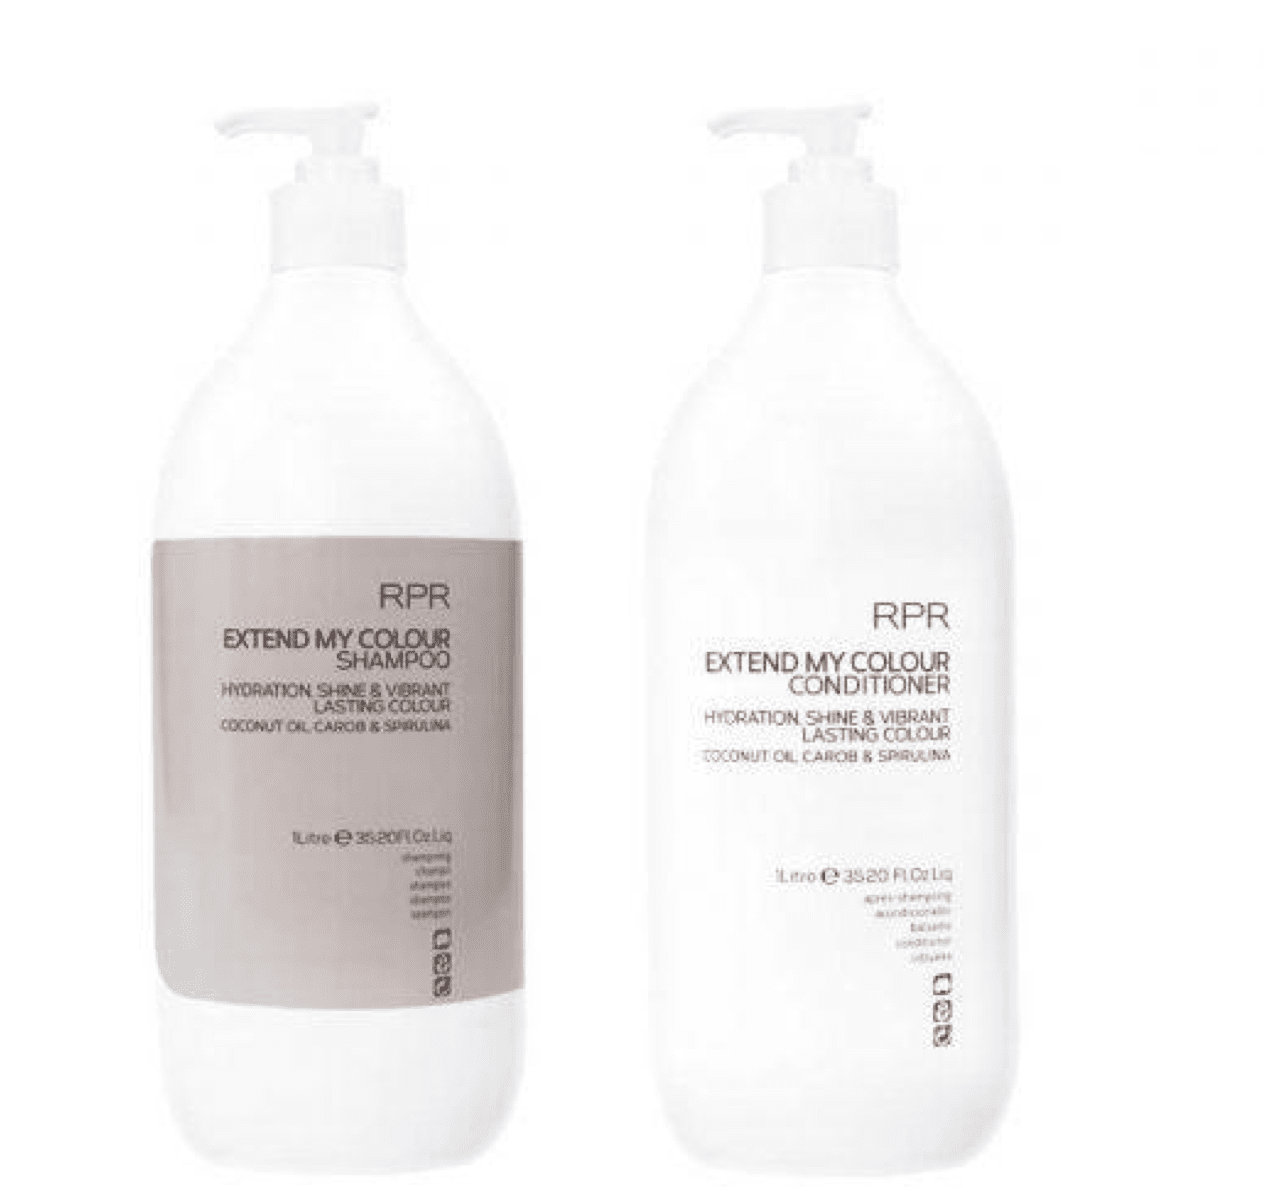 RPR Extend My Colour Shampoo and Conditioner 1000ml Duo Bundle